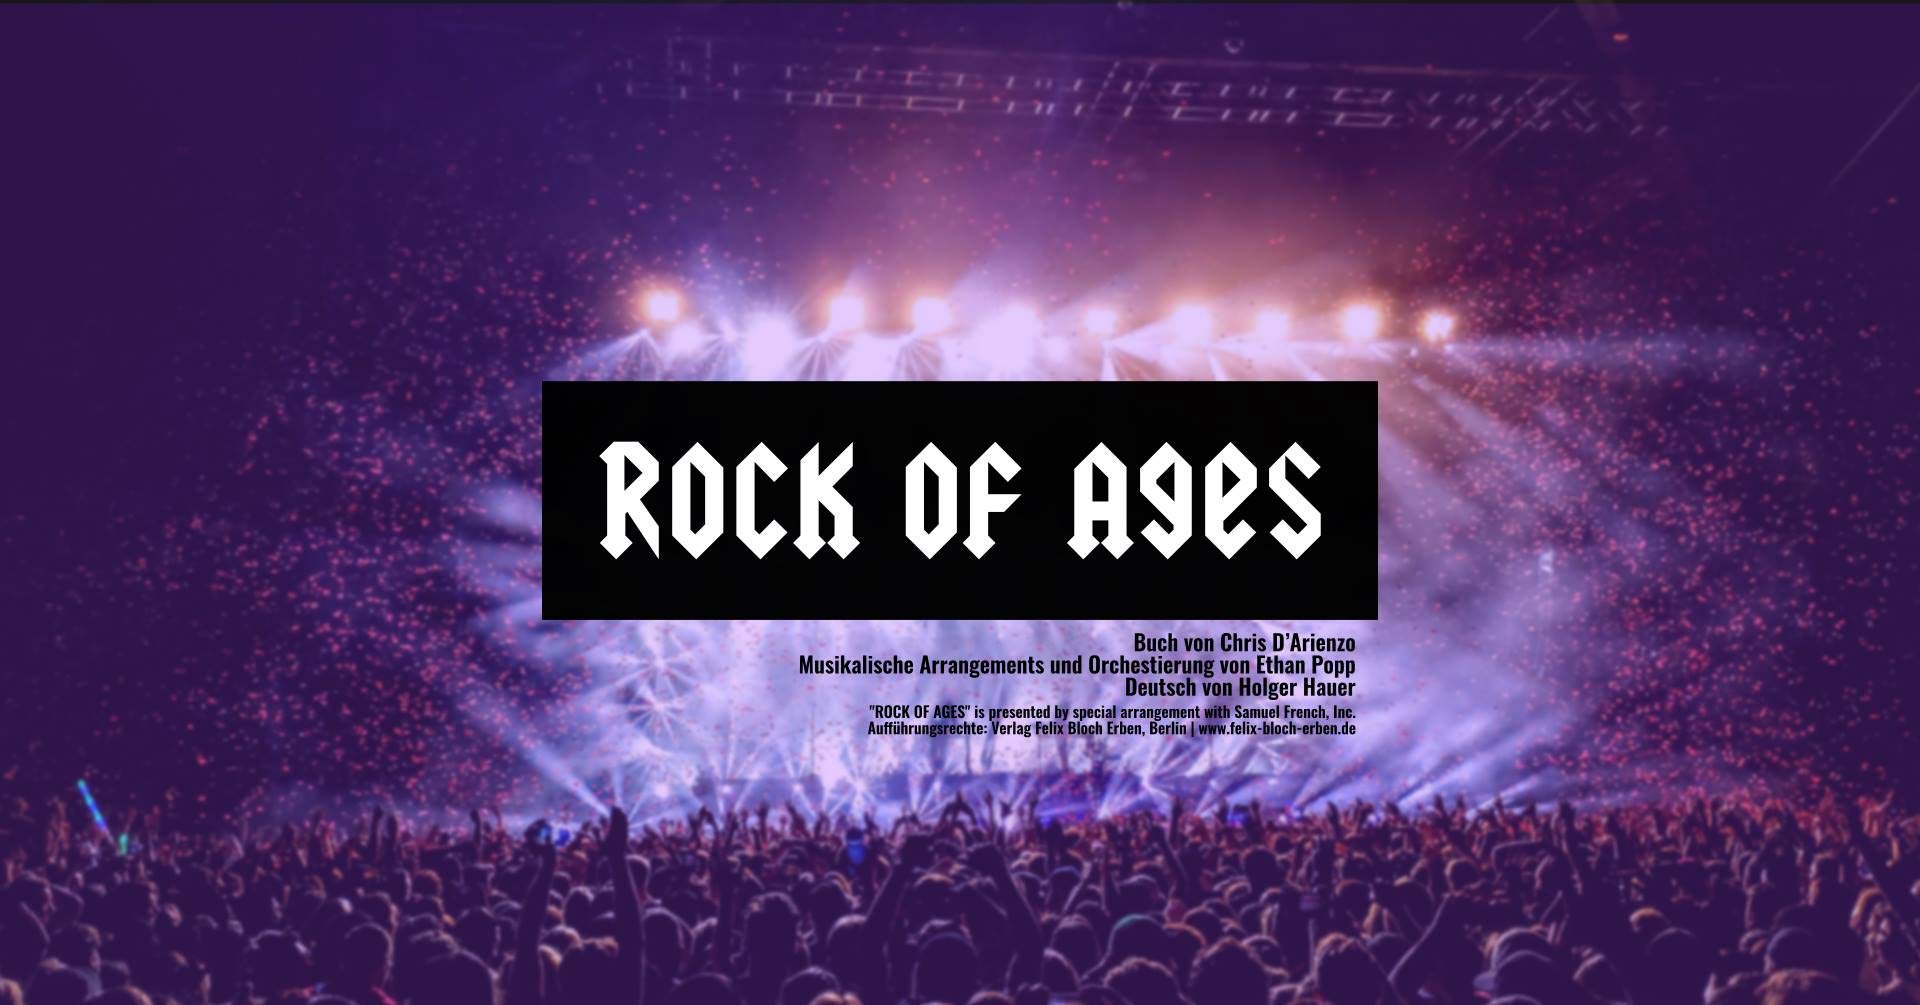 AMP Studierende spielen Musical "Rock of Ages"